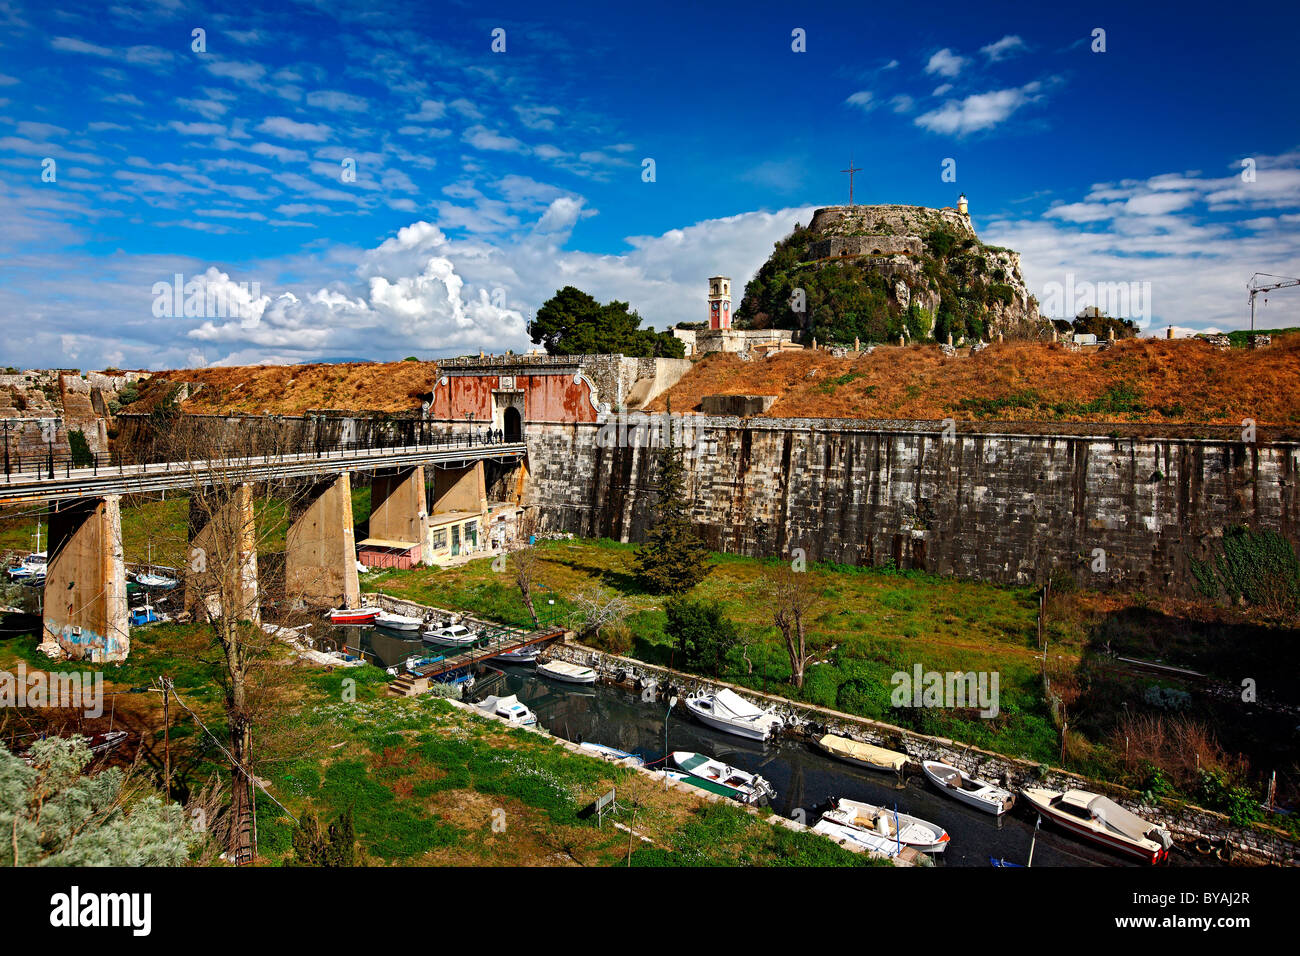 Greece, Corfu (or 'Kerkyra') island. The Old Fort and the canal called 'Contrafossa', that separates it from the old town Stock Photo